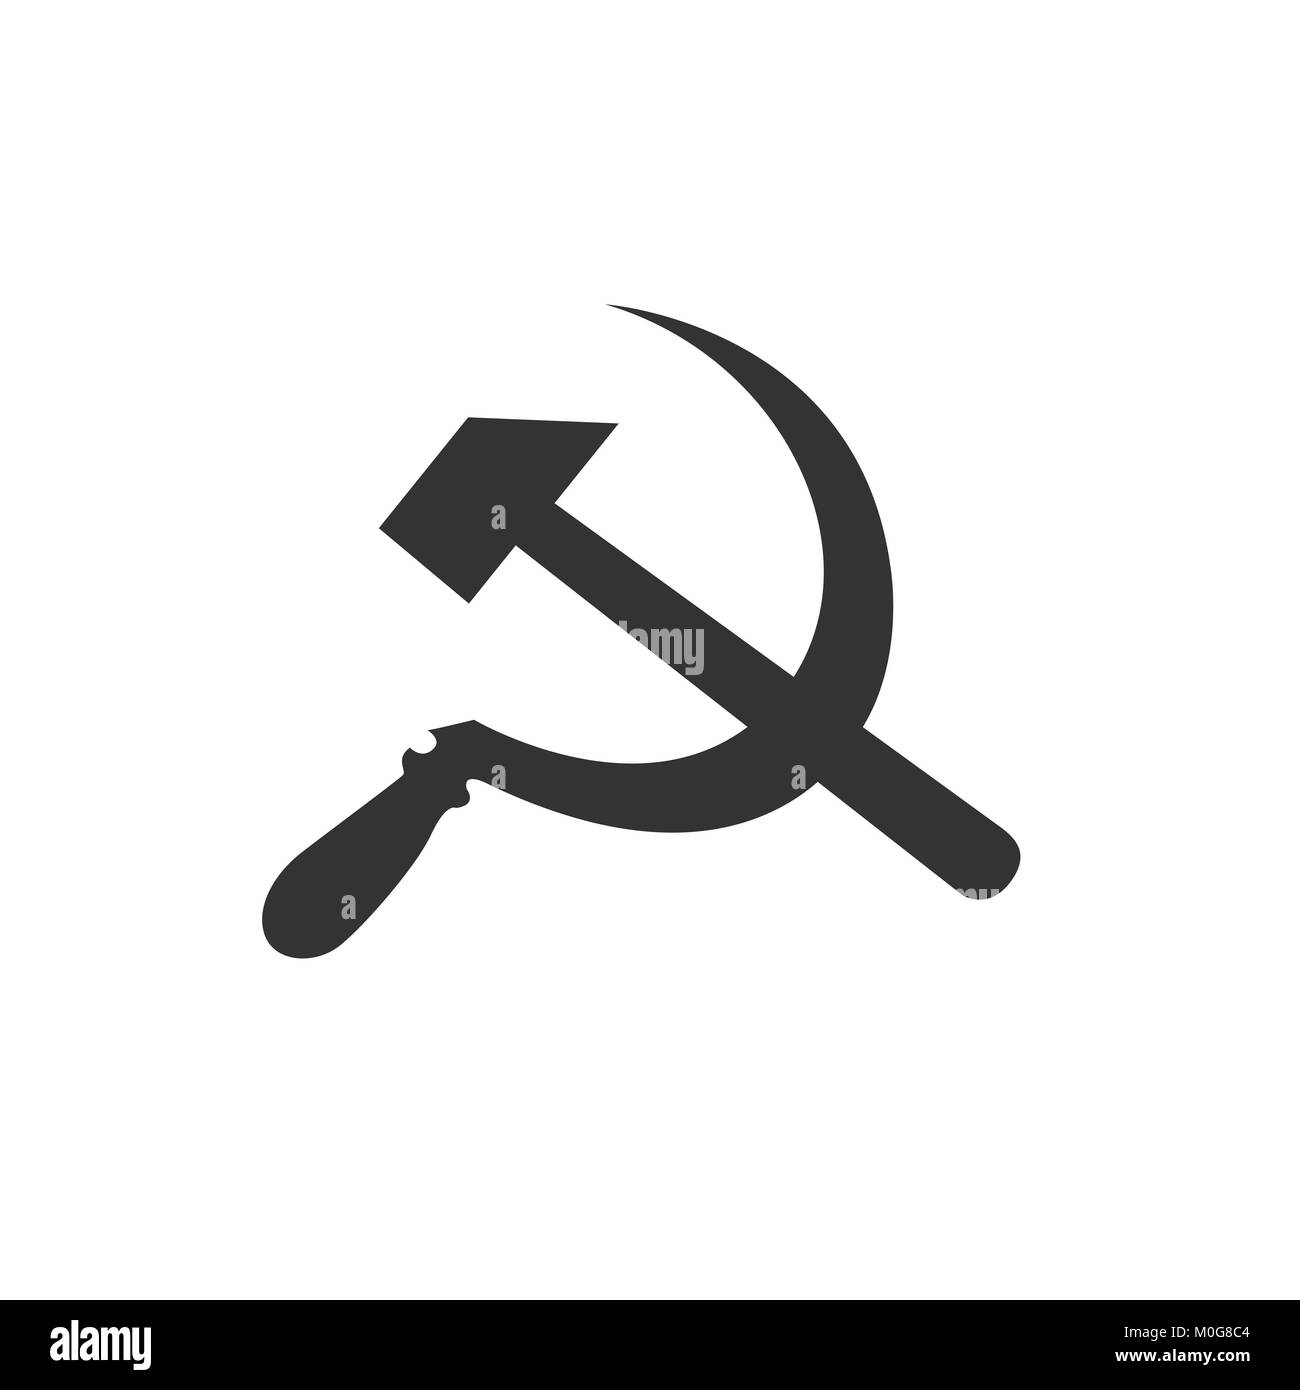 Hammer and Sickle communist symbol vector Stock Photo - Alamy